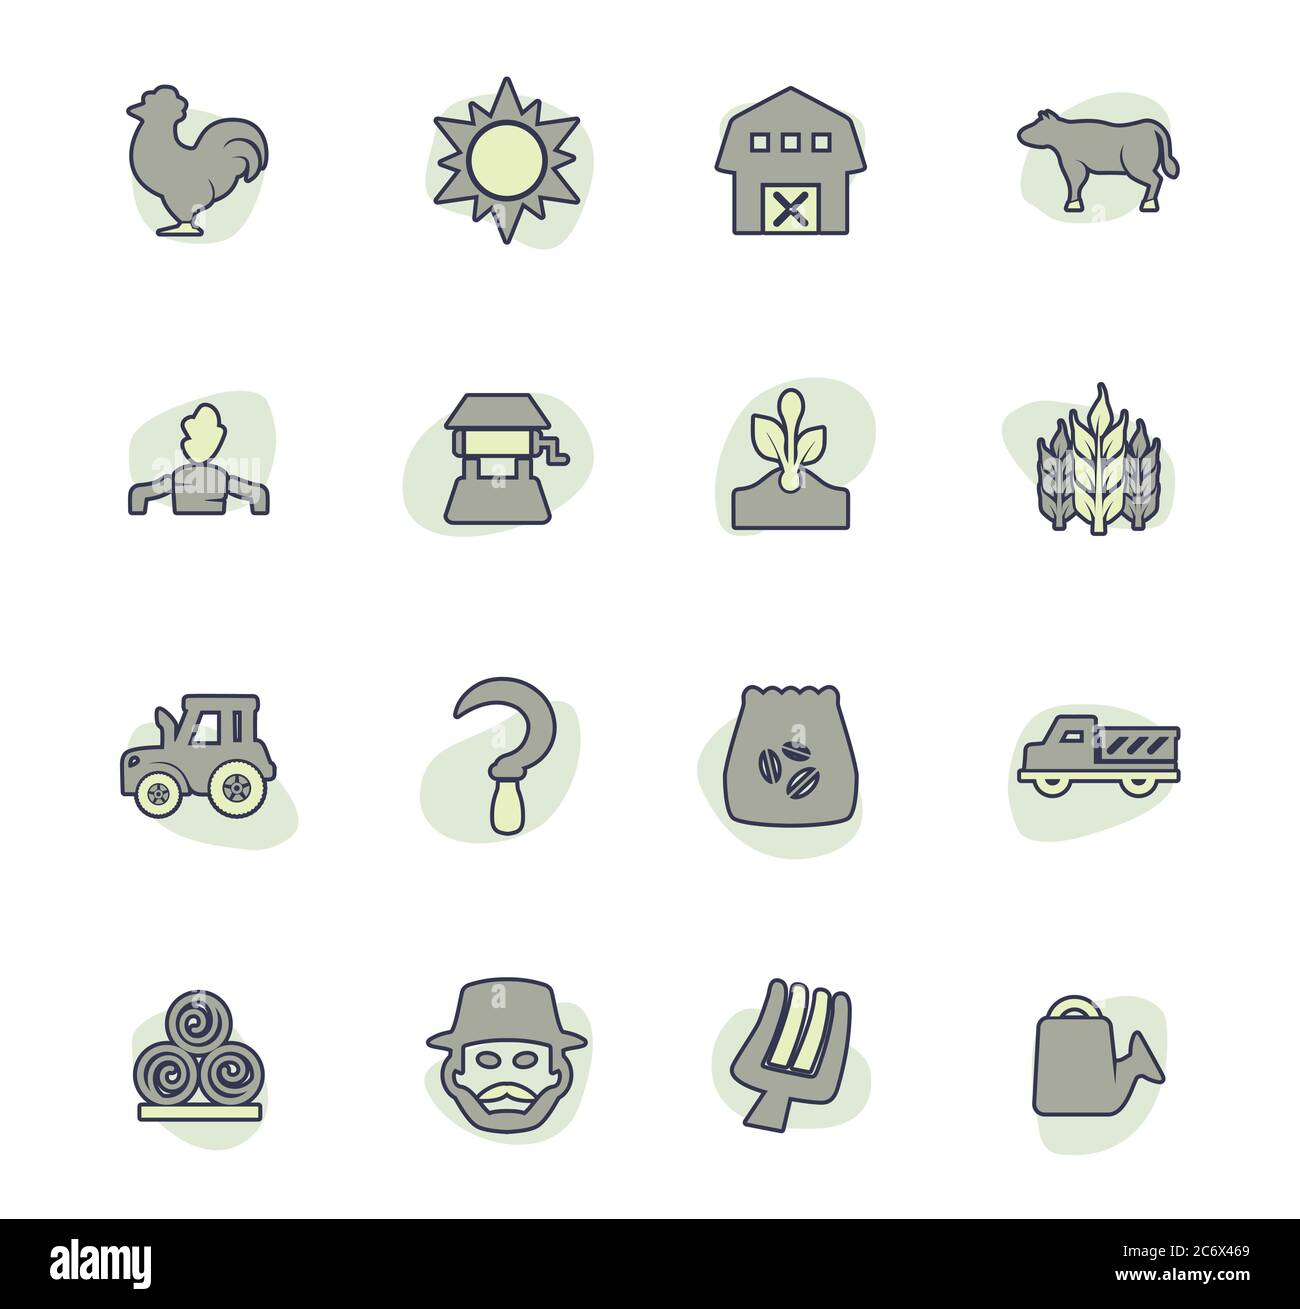 Agriculture and farming icons set Stock Vector